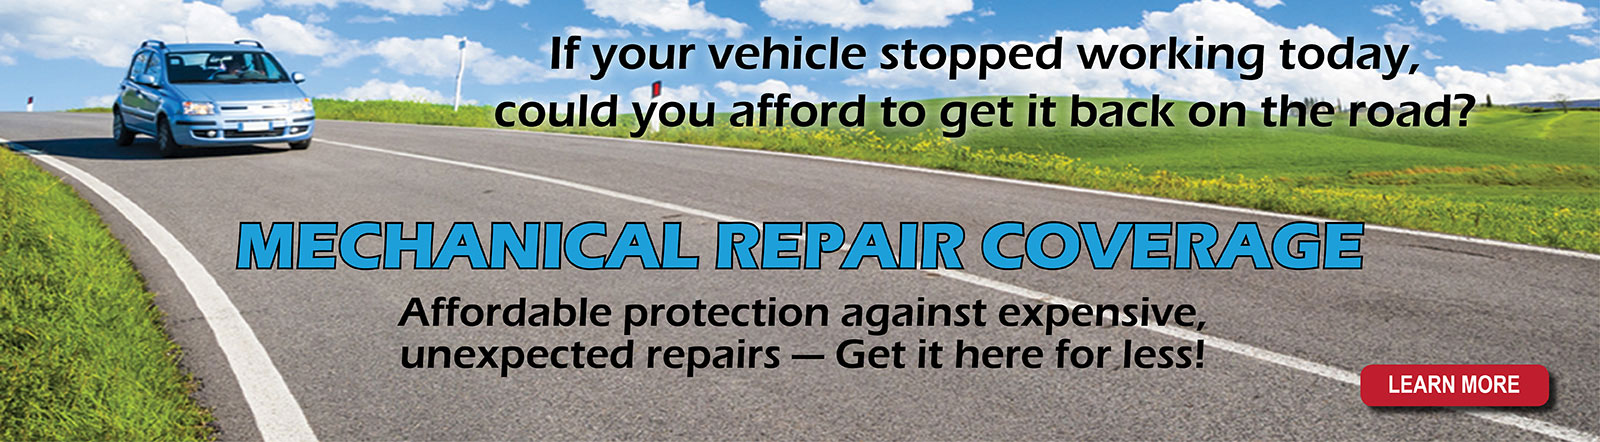 Get your vehicle back on the road with affordable Mechanical Repair Coverage from Bulldog